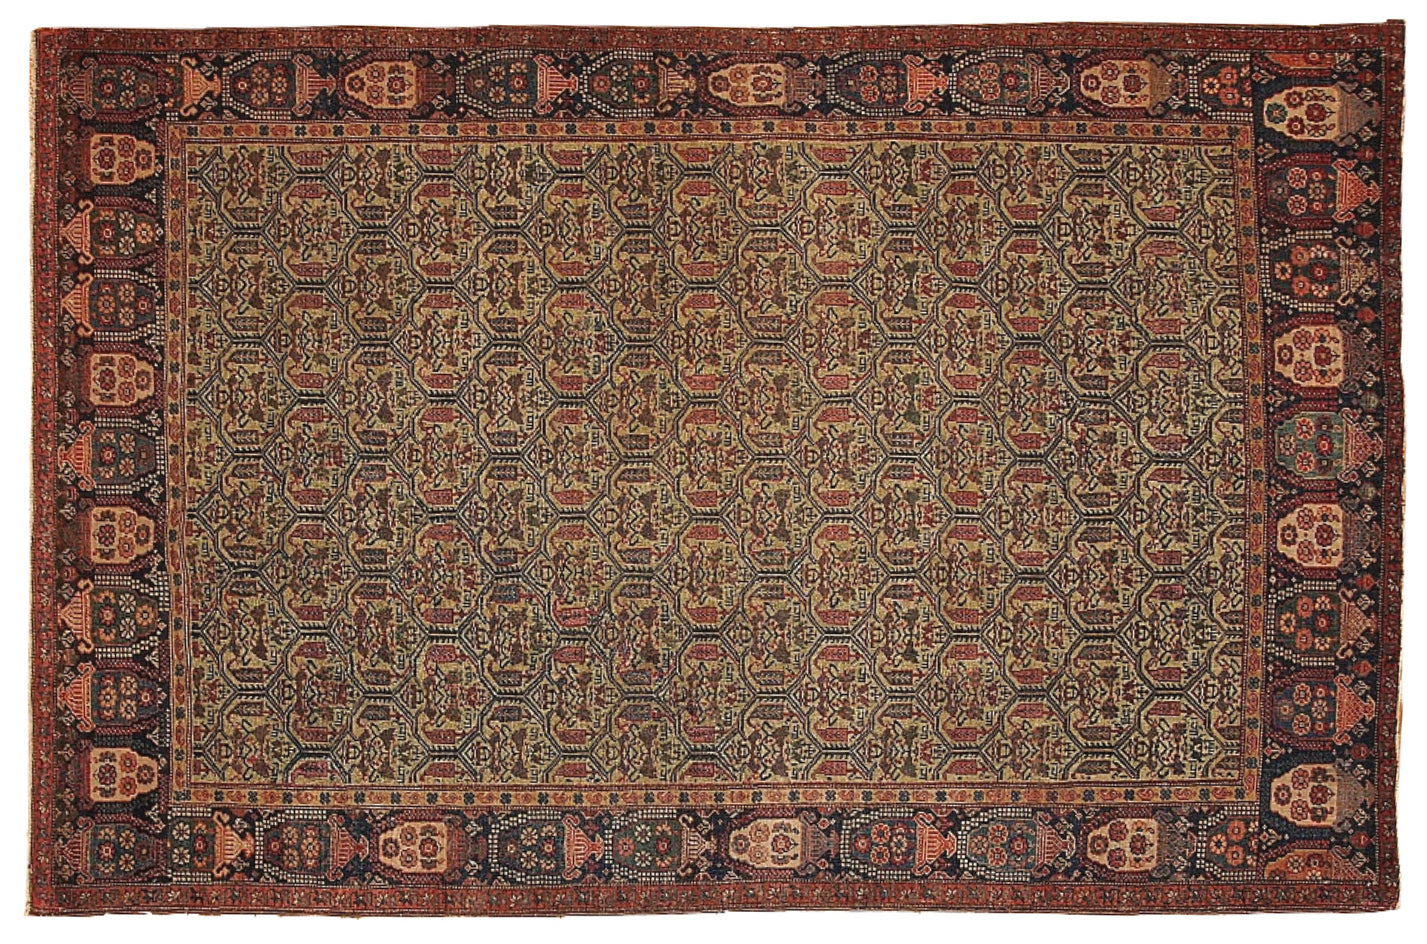 Close-Up of Antique Rug's Texture